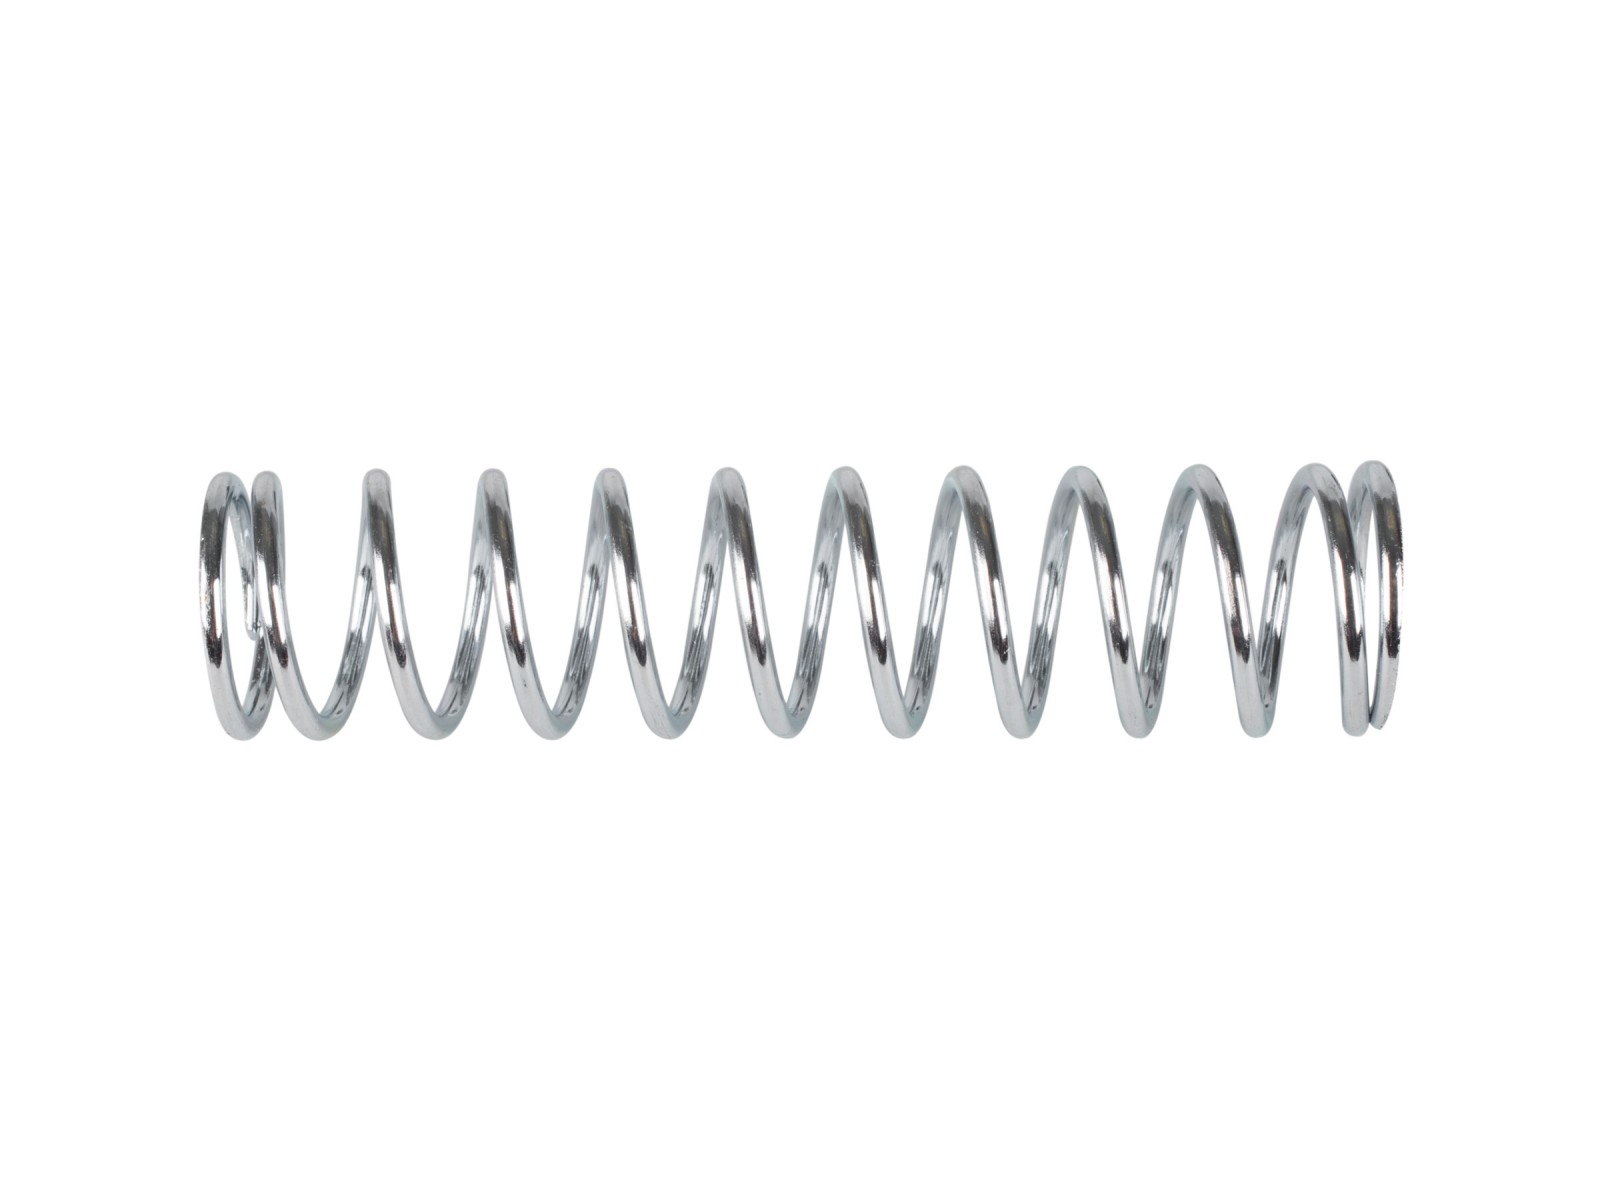 Air Arms FAC Hammer Spring, fits S400, S410, S500, S510 rifles